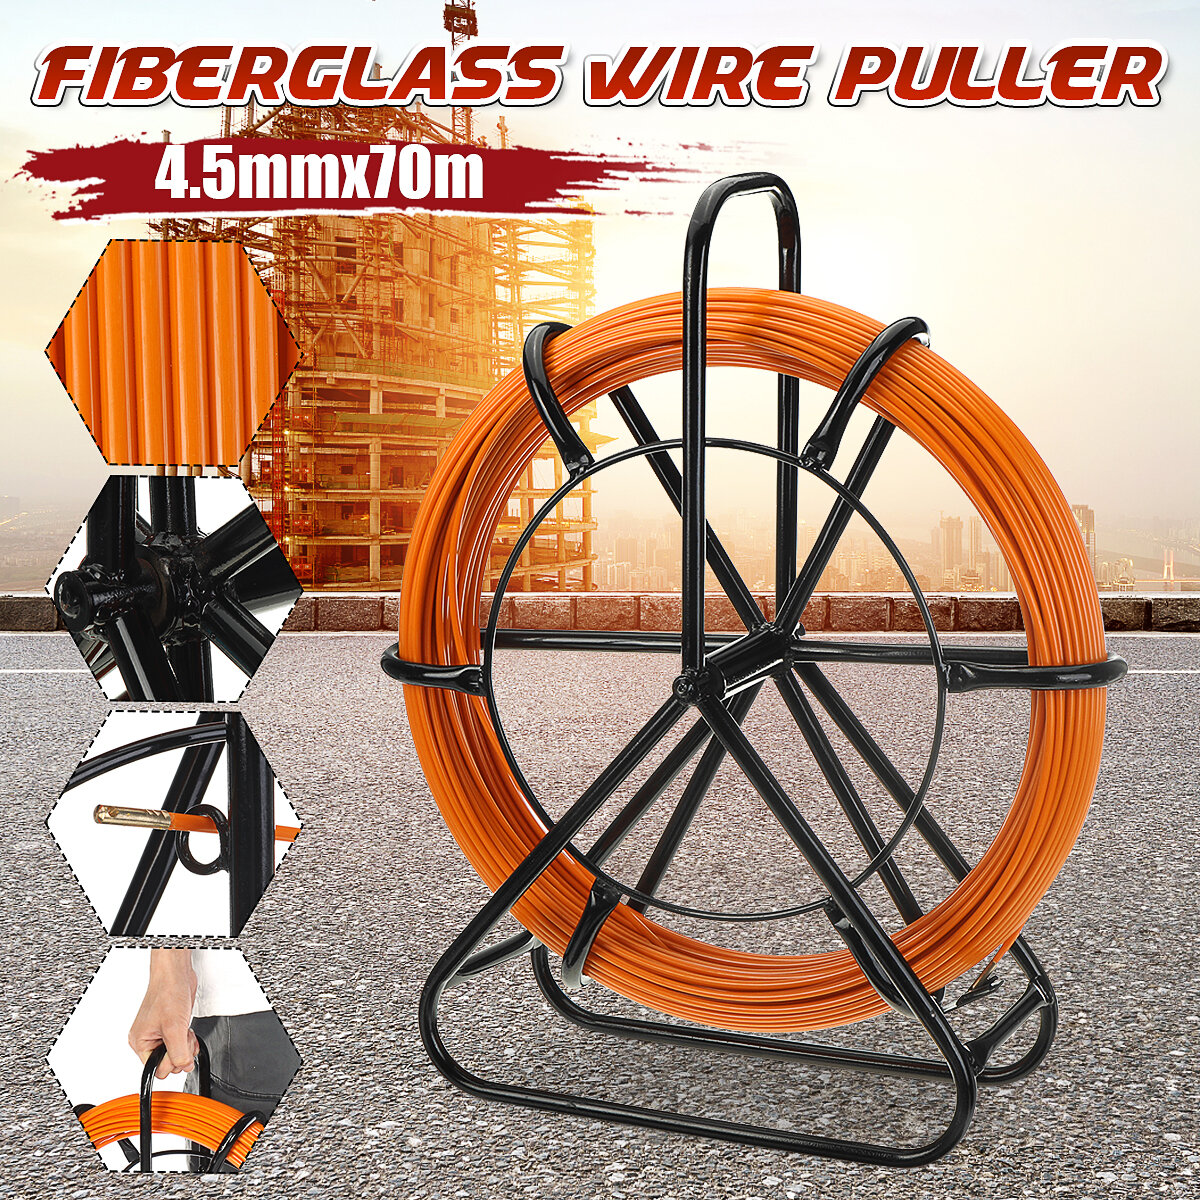 

4.5mmX70m Fiberglass Cable Puller Running Rod Snakes Fish Tape Rodder Flexible Lead Electric Wire Power Cable Puller Mac